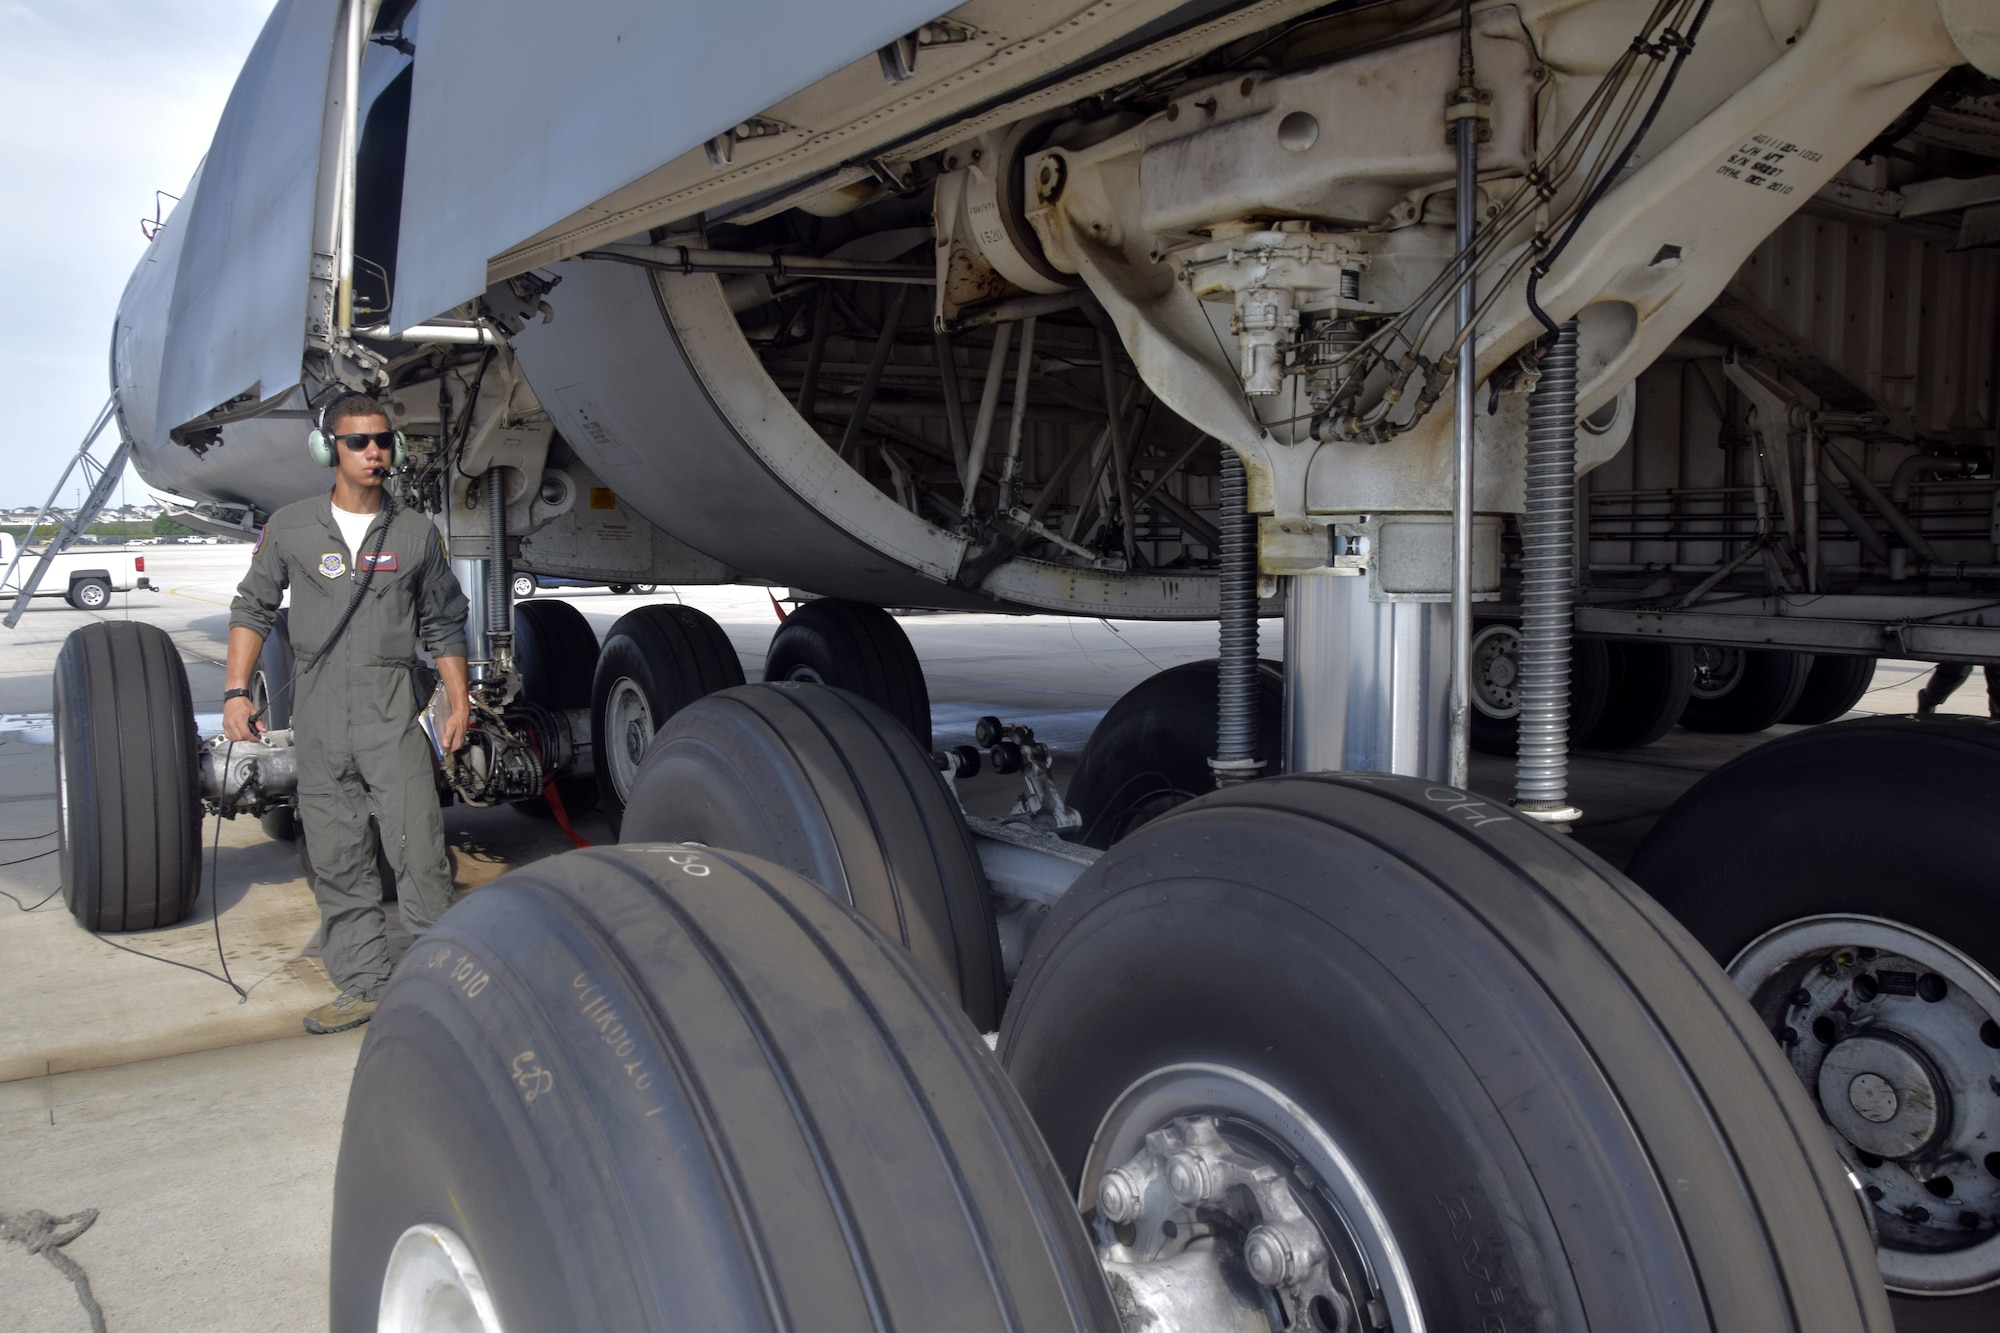 U.S. Air Force Airman Joseph Mitchell, 733rd Training Squadron loadmaster student, conducts a preflight check after loading the C-5M Super Galaxy aircraft with multiple vehicles during a training exercise at Joint Base San Antonio-Lackland, Texas, Aug. 2, 2018.